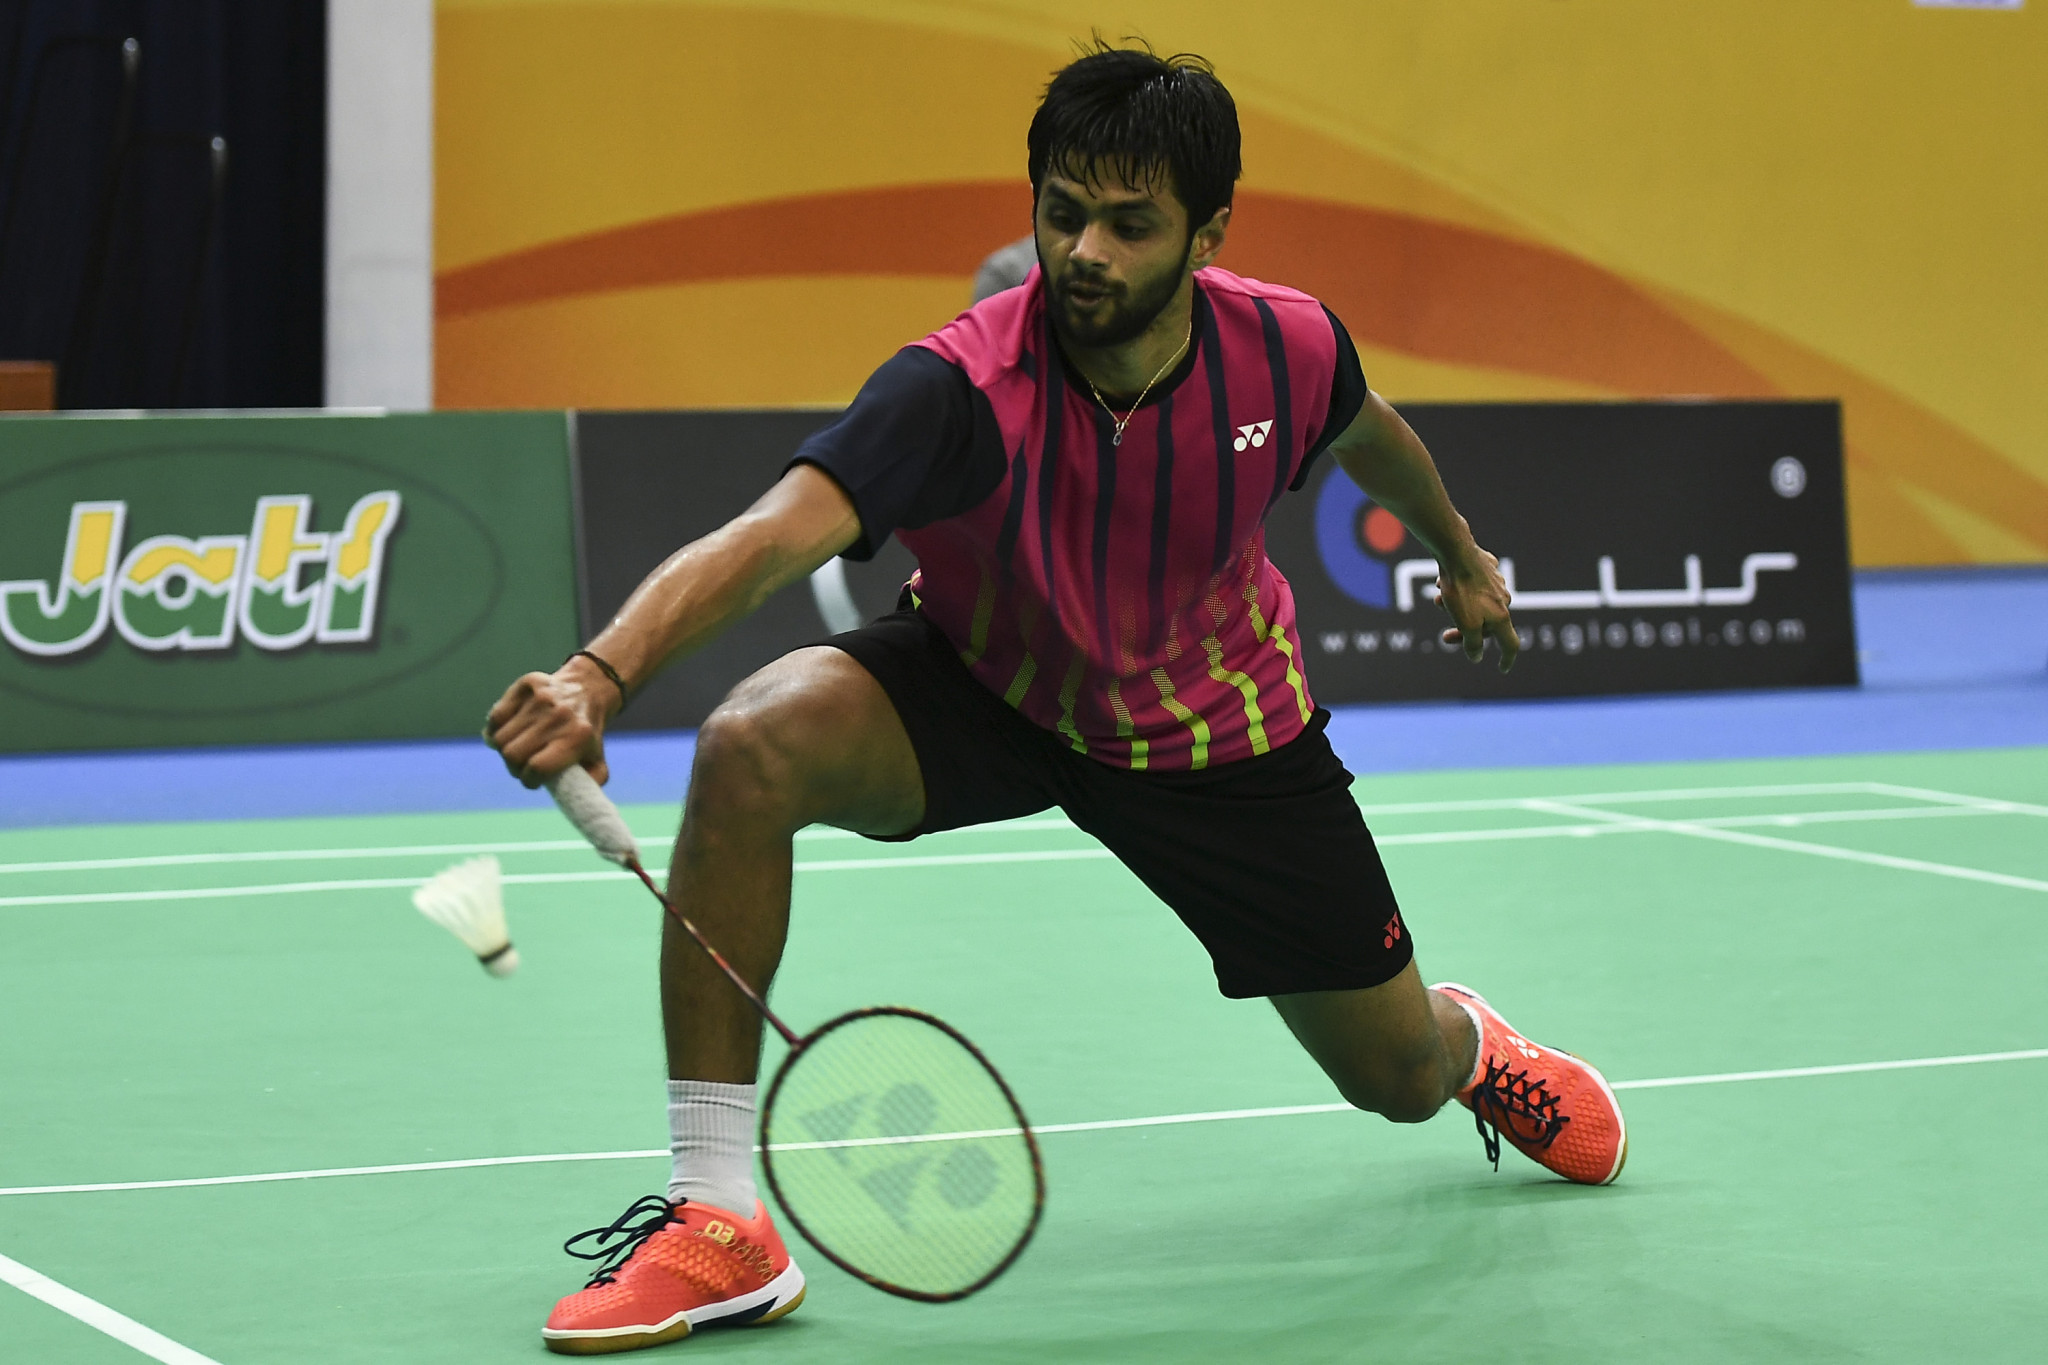 Second seed Sai Praneeth Bhamidipati of India beat Israel's Misha Zilberman in straight games in the men's tournament ©Getty Images